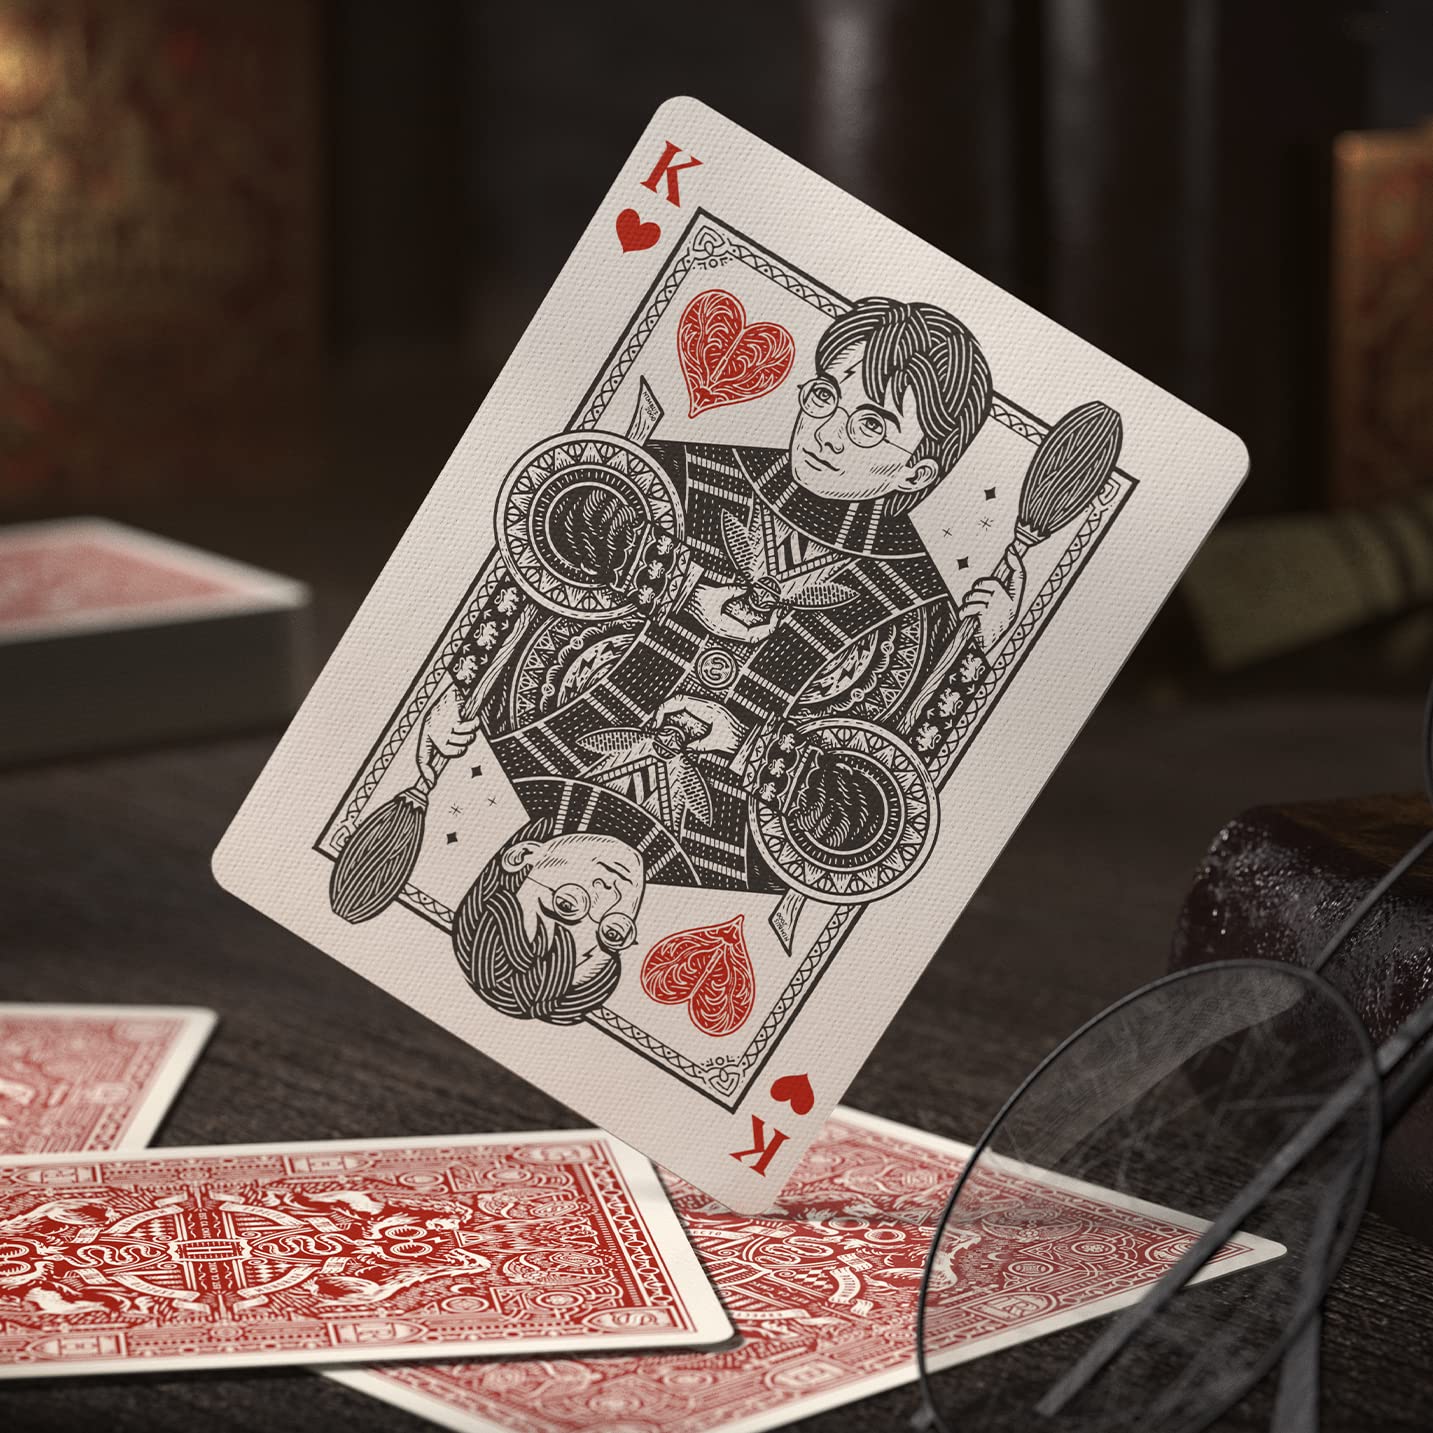 theory11 Harry Potter Playing Cards - Red (Gryffindor)